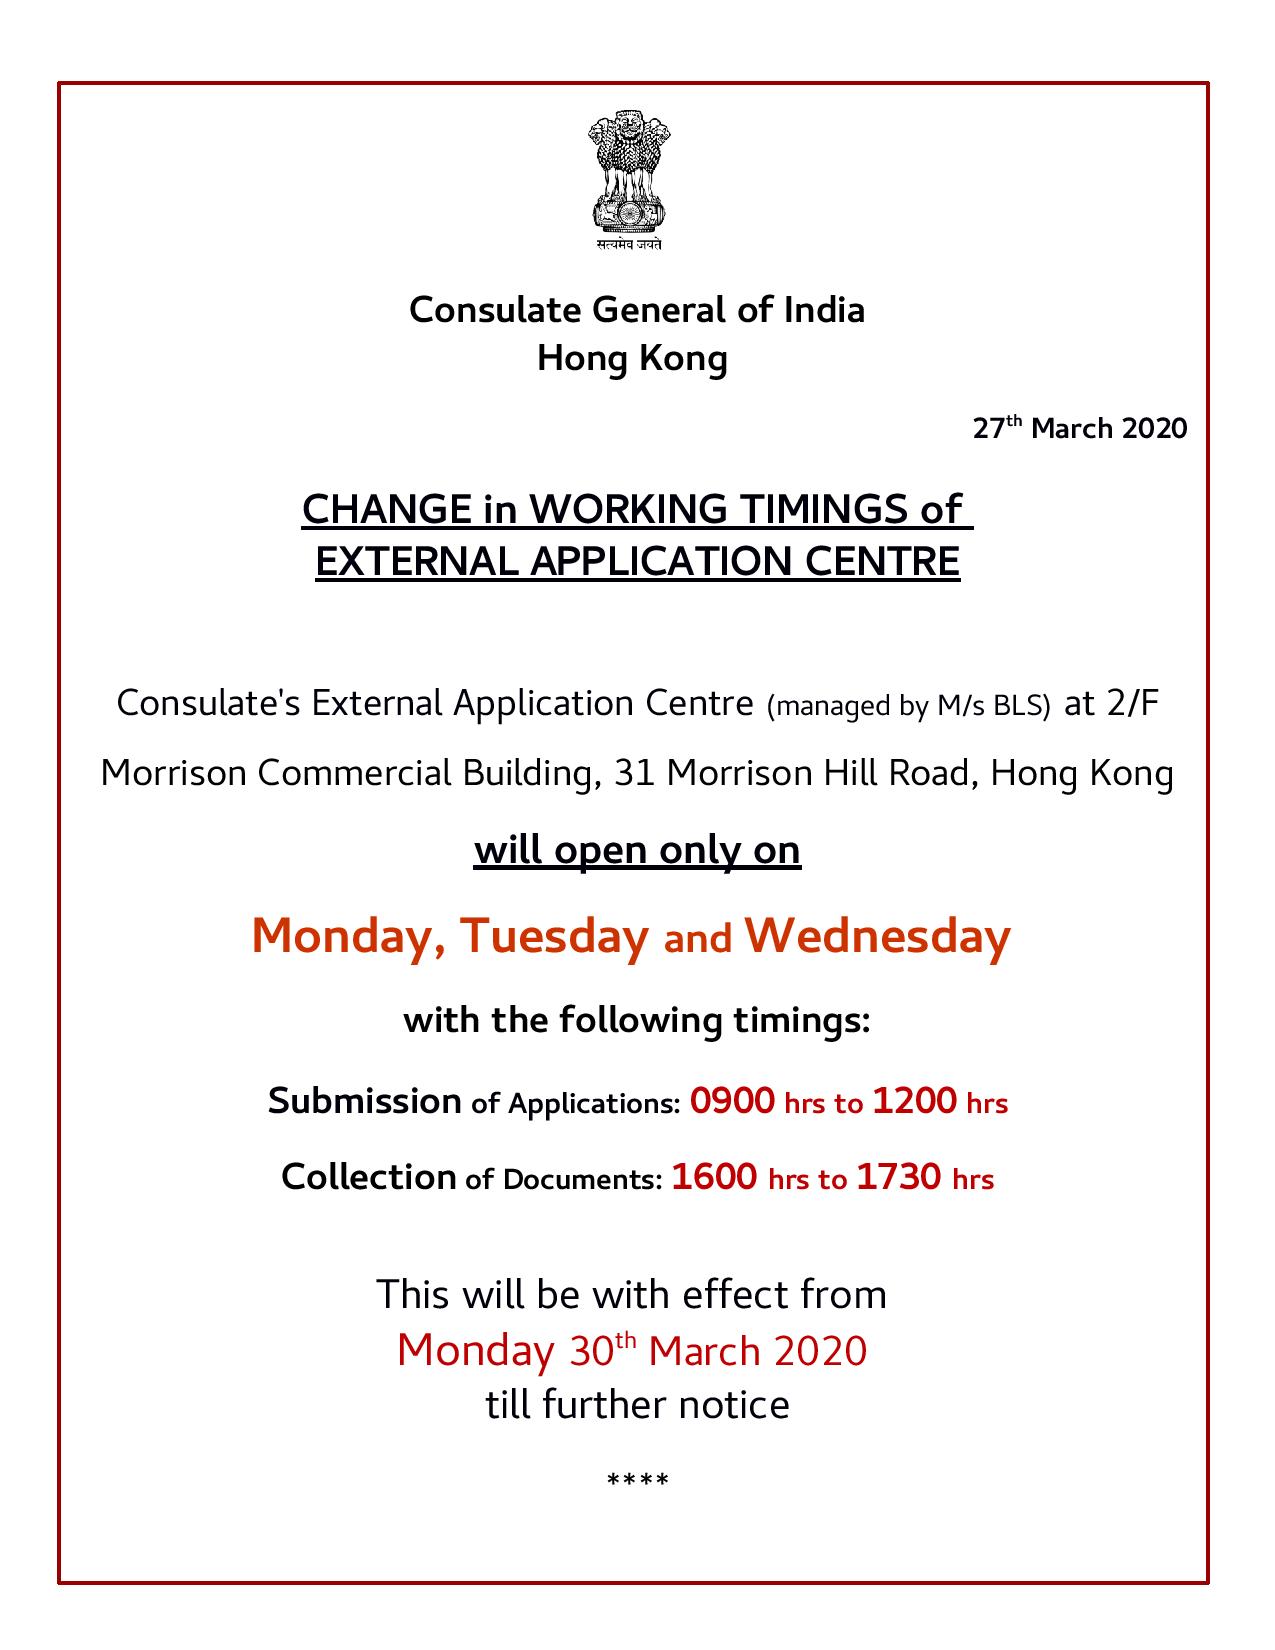 Change in working timings of Consulate's External Application Centre